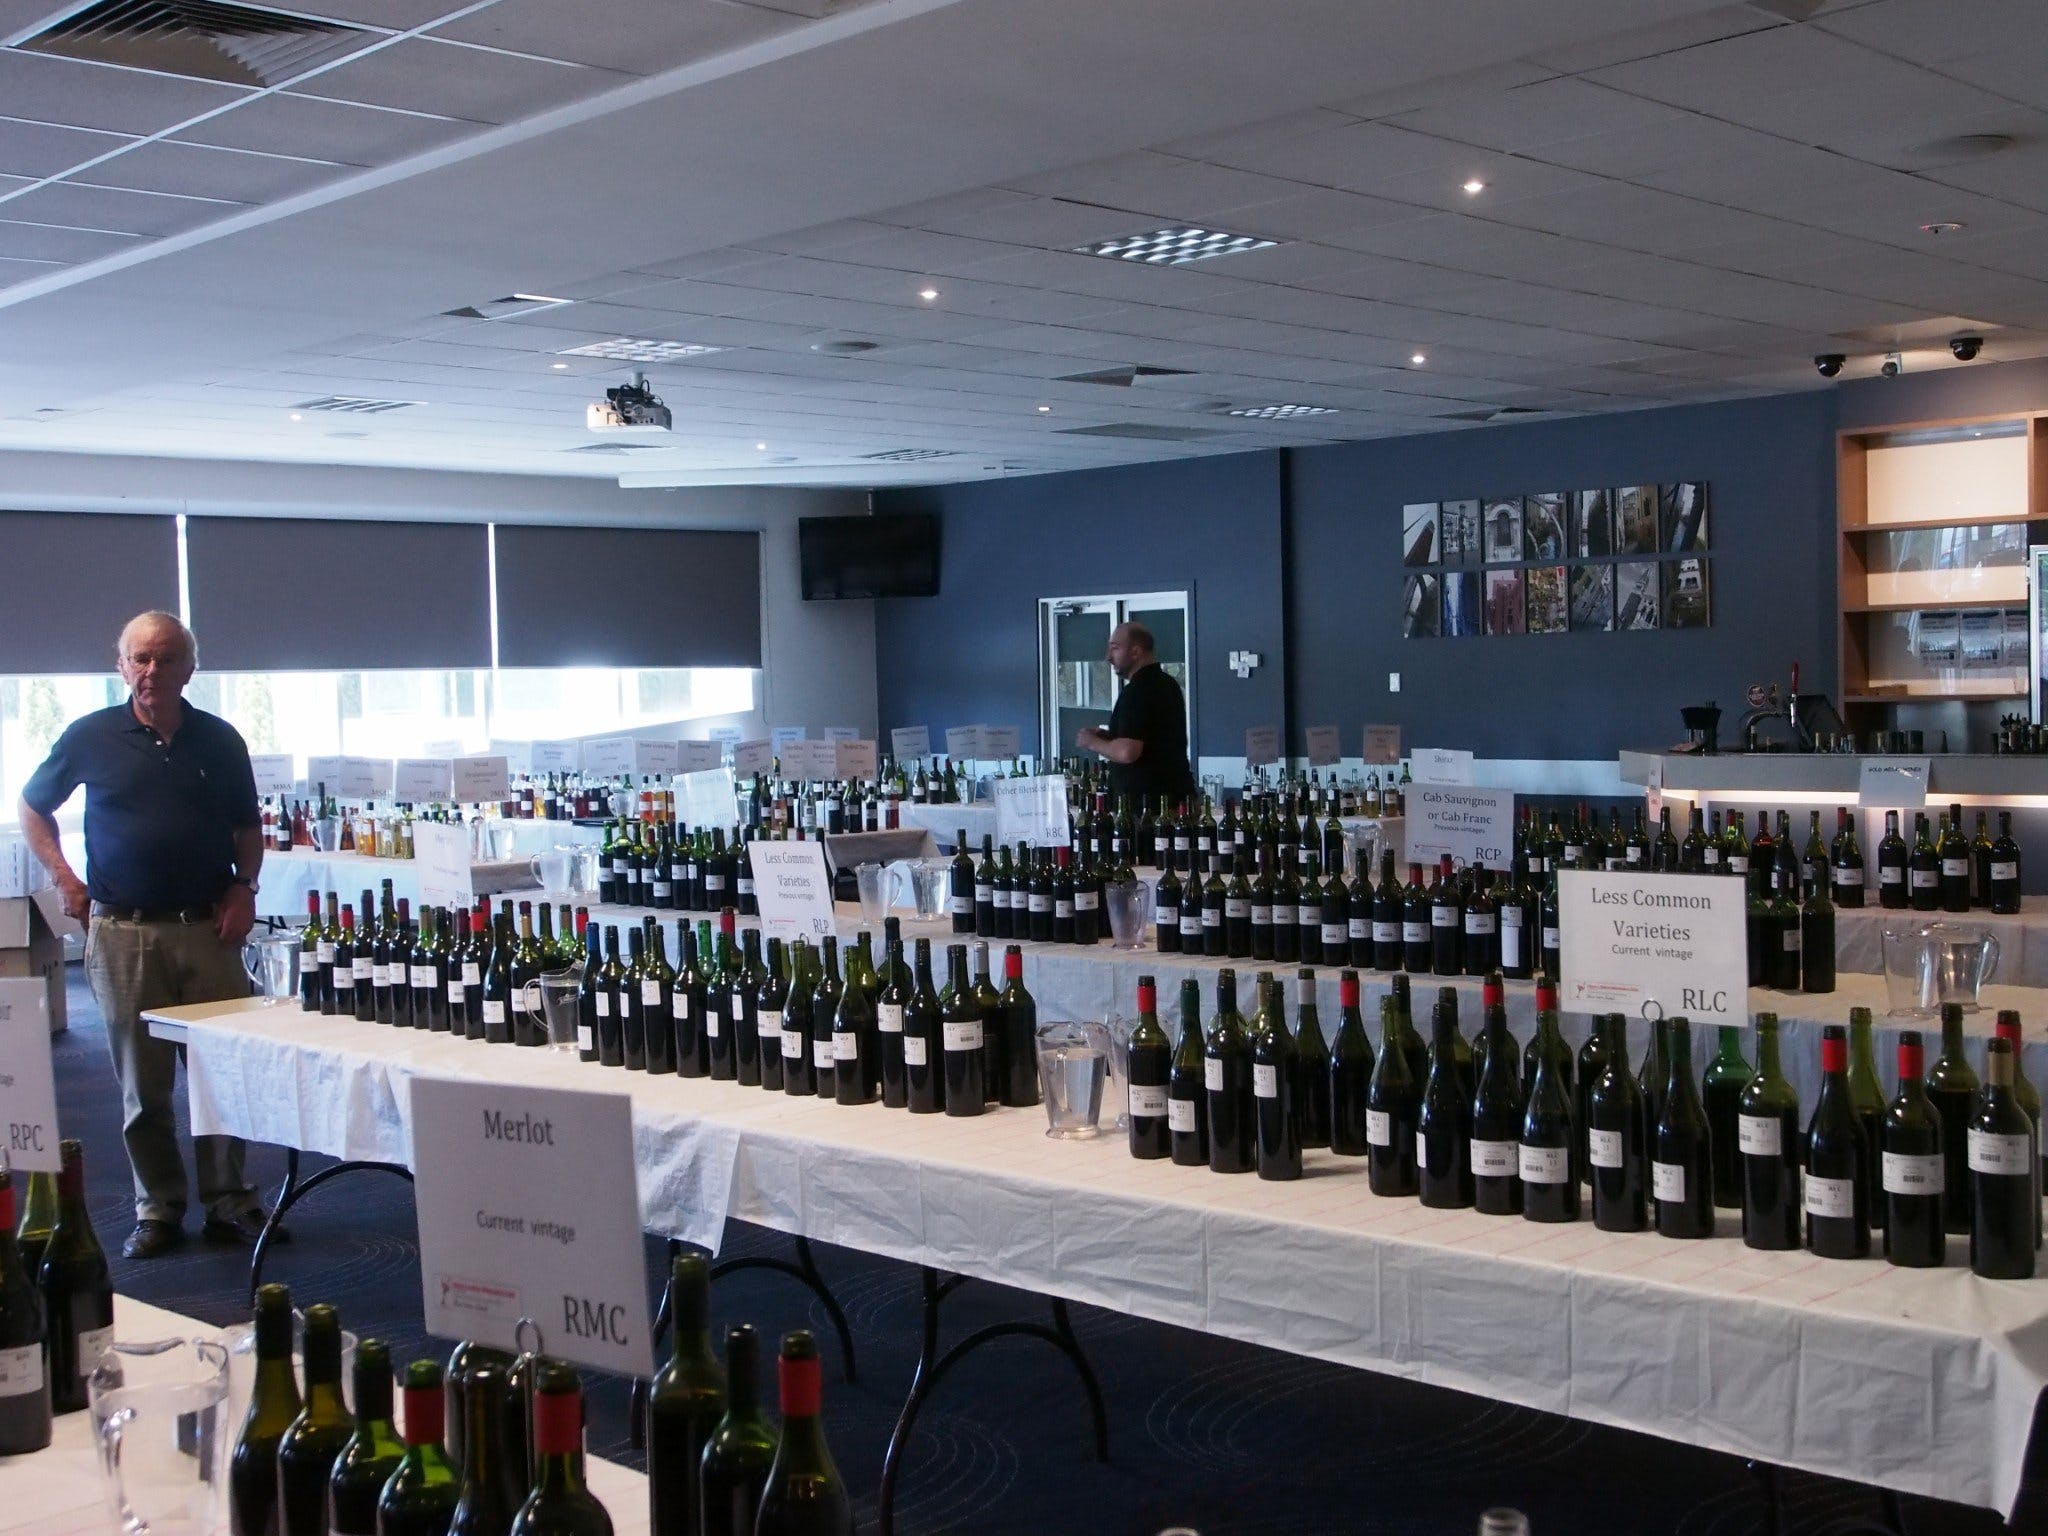 Eltham and District Wine Guild Annual Wine Show - 51st Annual Show - Broome Tourism